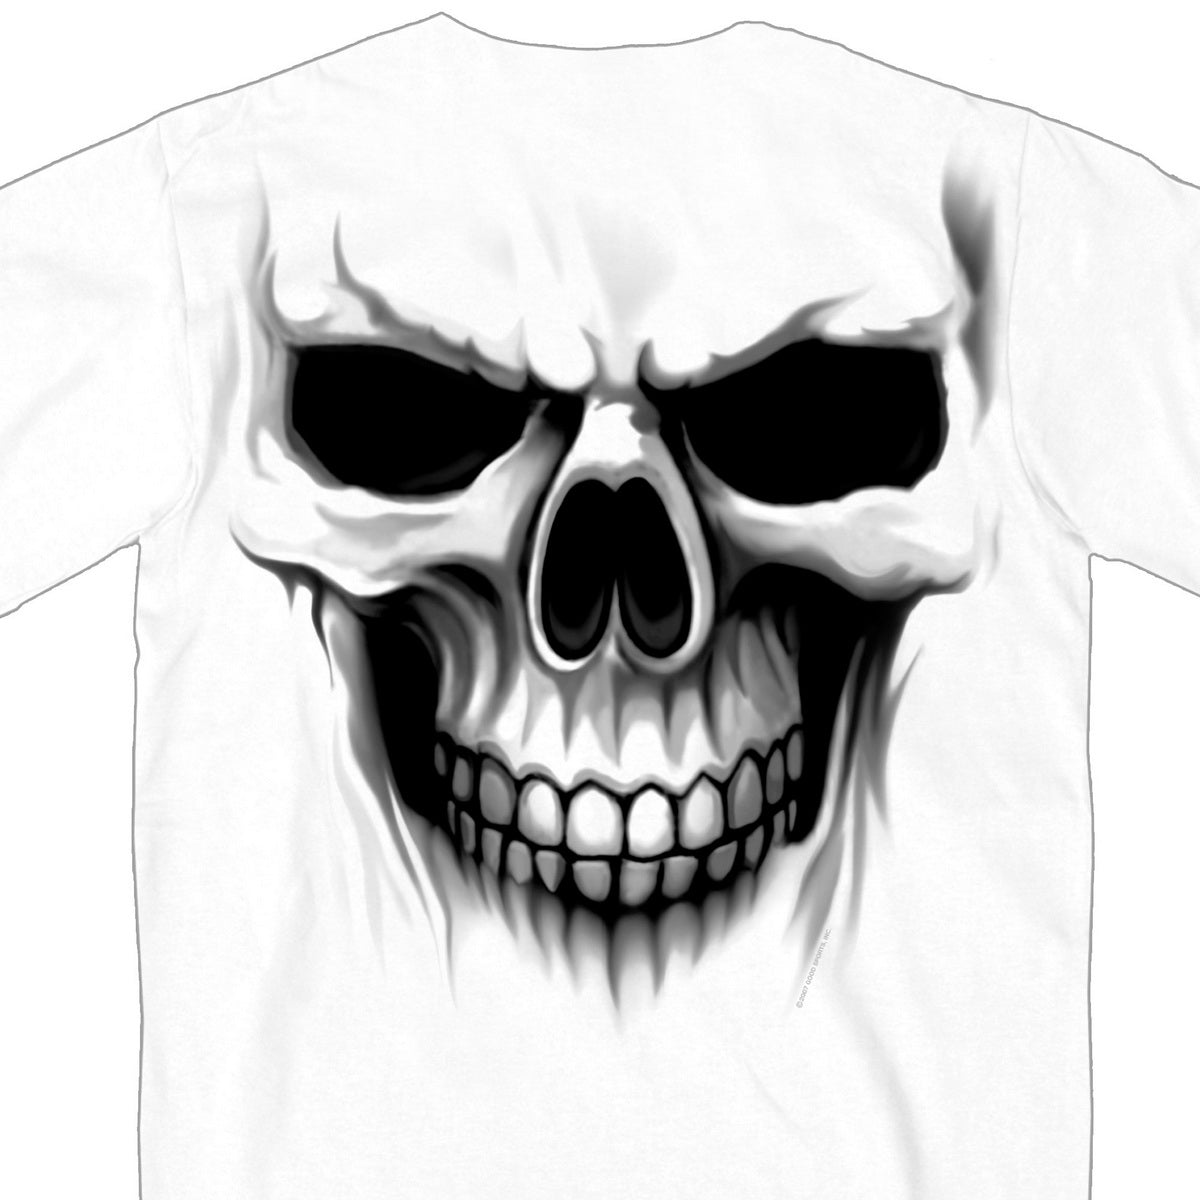 Hot Leathers GMD1080 Men's 'Ghost' Skull Double Sided White Printed T-Shirt